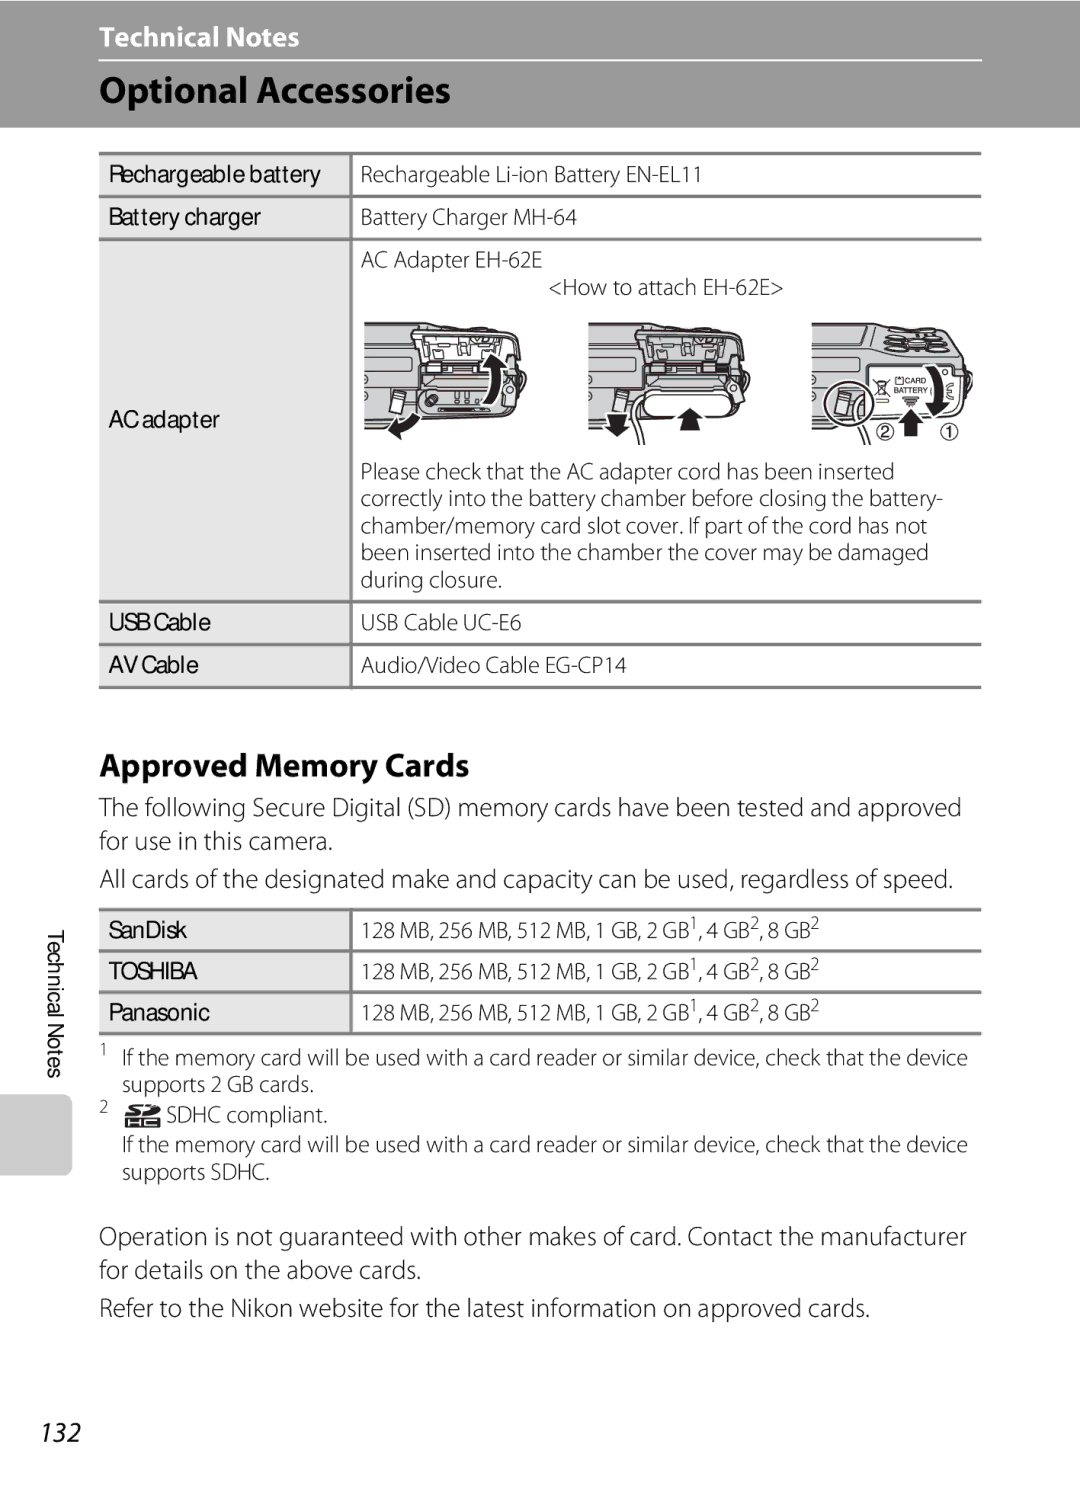 Nortel Networks S560 user manual Optional Accessories, Approved Memory Cards, 132, During closure 